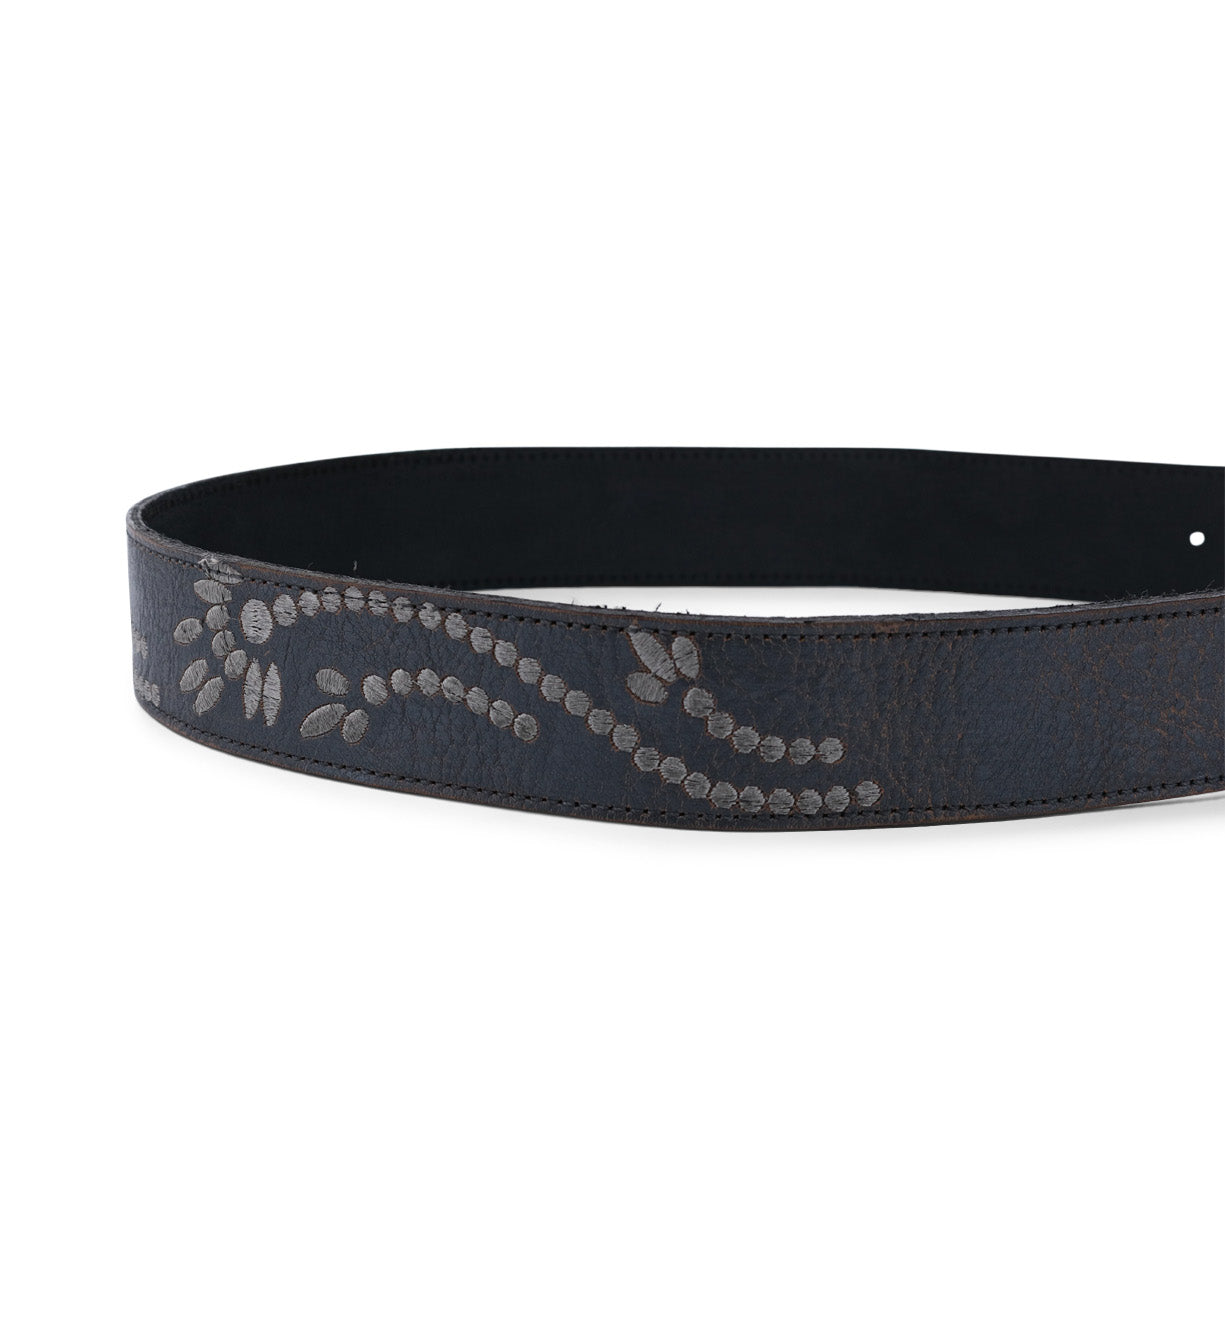 A Mohawk belt by Bed Stu with silver studs and flowers.